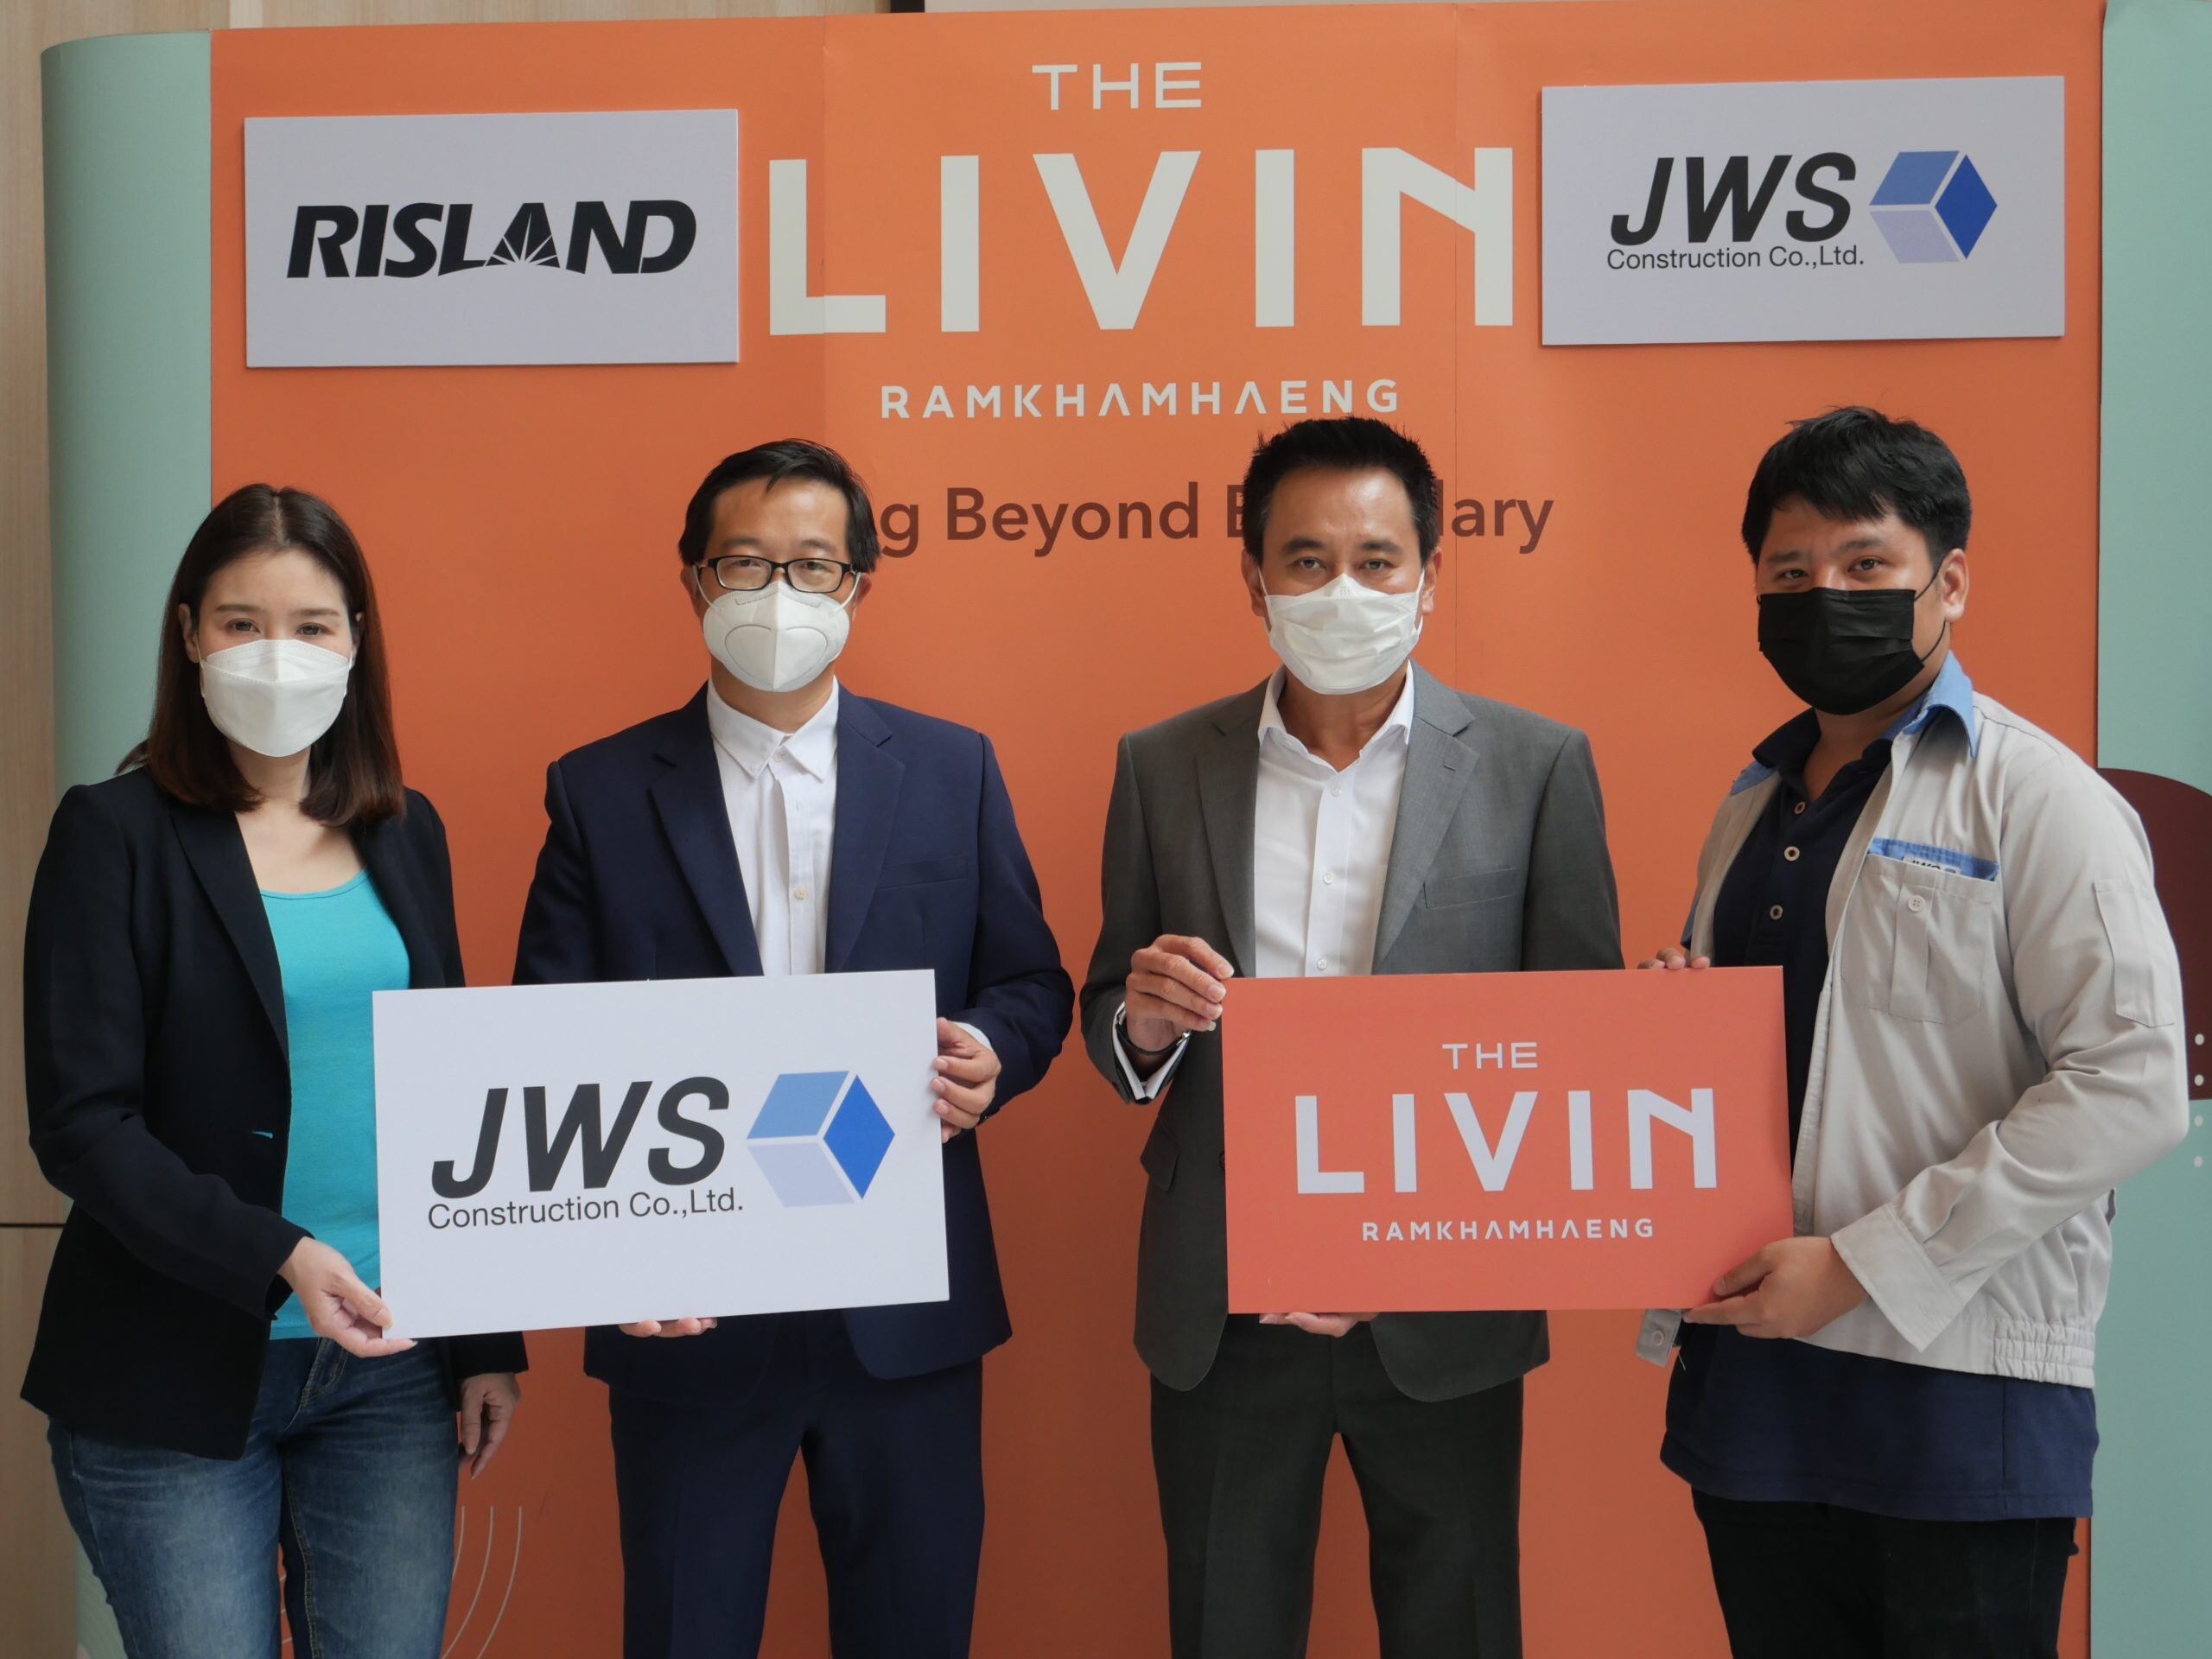 The Livin Ramkhamhaeng Appoints JWS as the Main Contractor to Construct the Project, Moving Forward to Build After the Easing of Lockdown Measures